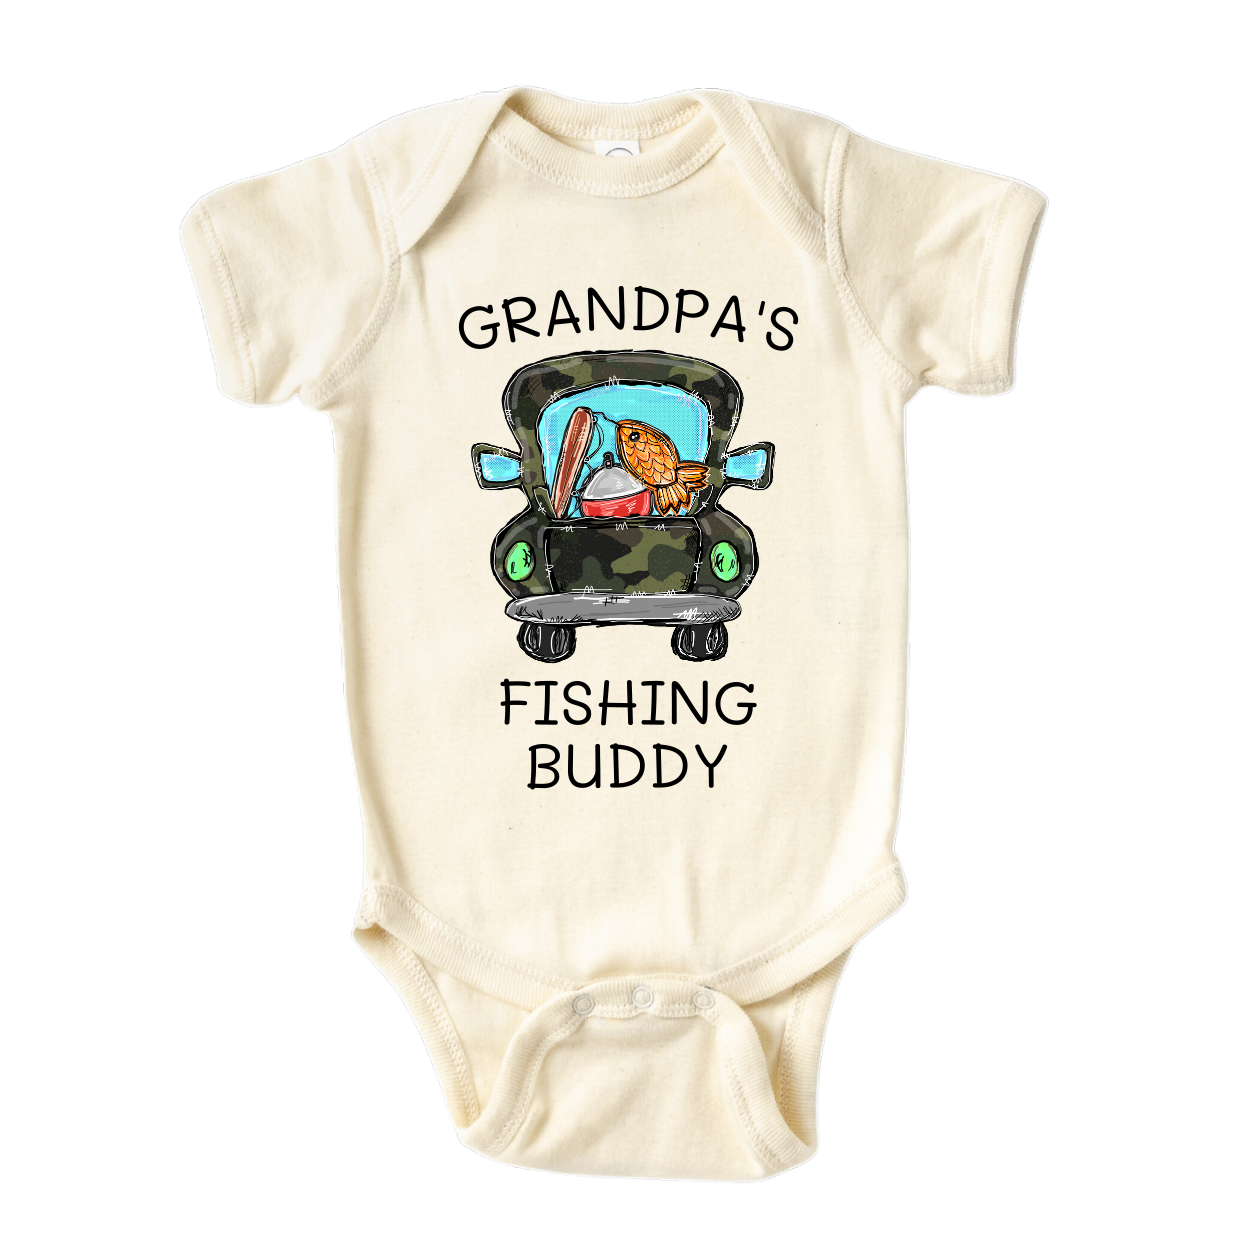 Baby Onsie - Gift for grandfather - Father's Day gift - Custom Baby Clothes for Newborn - Gift for Newborn - Baby Shower Gift - Fishing buddy grandpa's announcement